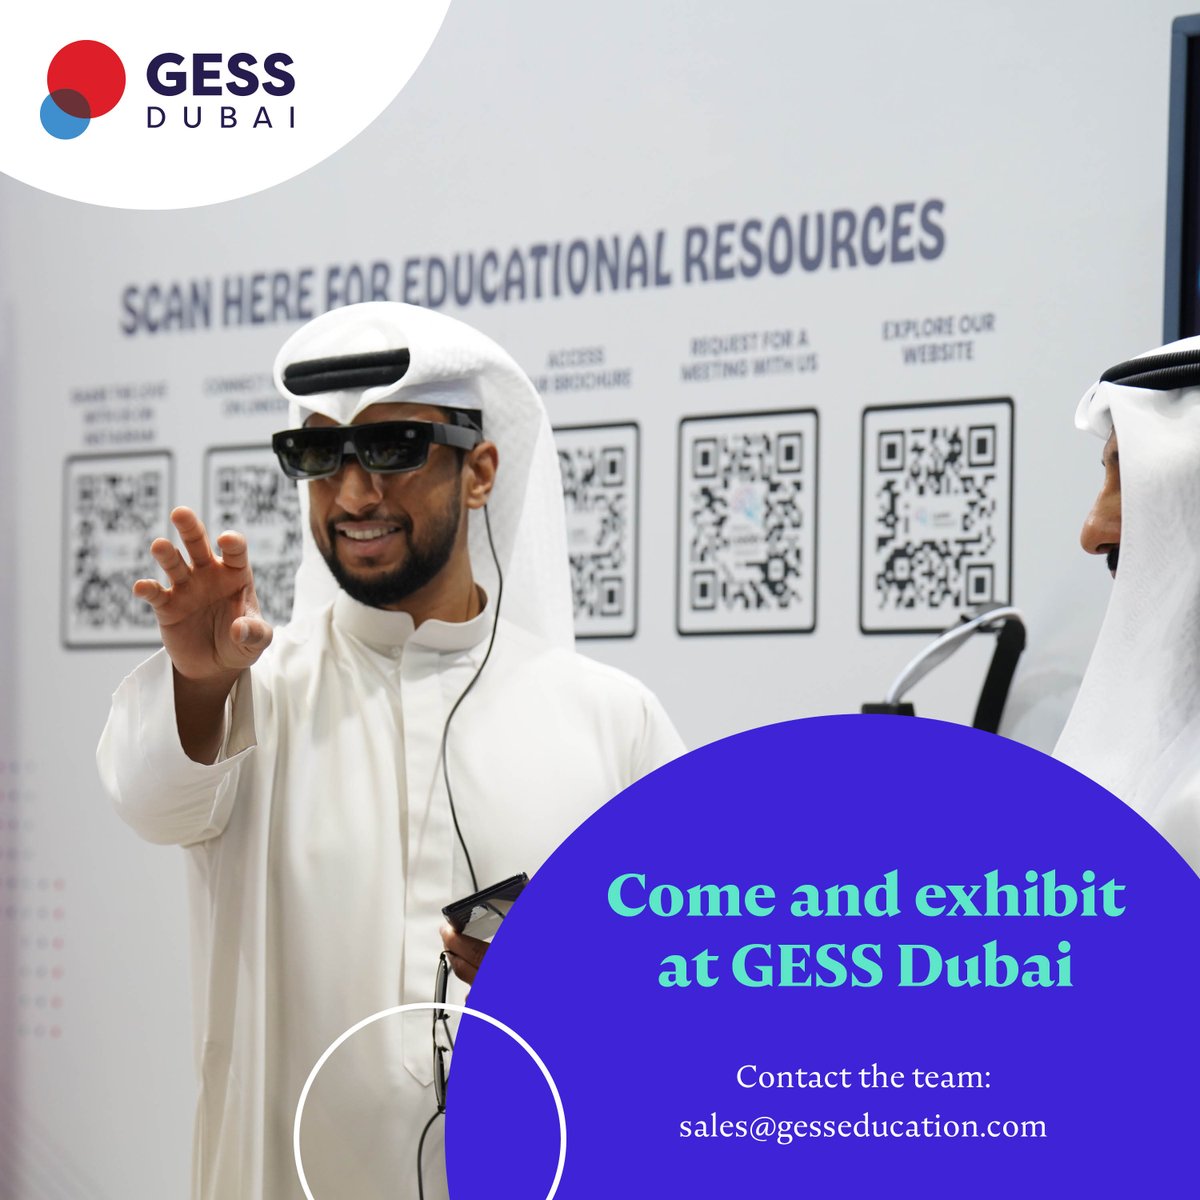 Book your stand at the leading education conference in the Middle East, #GESSDubai😀📚 Receive the early bird discount! Deadline: April 26th⏰ Taking place 12-14 November, at Dubai World Trade Centre, Sheikh Saeed Halls 1-3 Get in touch 👇 gessdubai.com/lets-get-touch